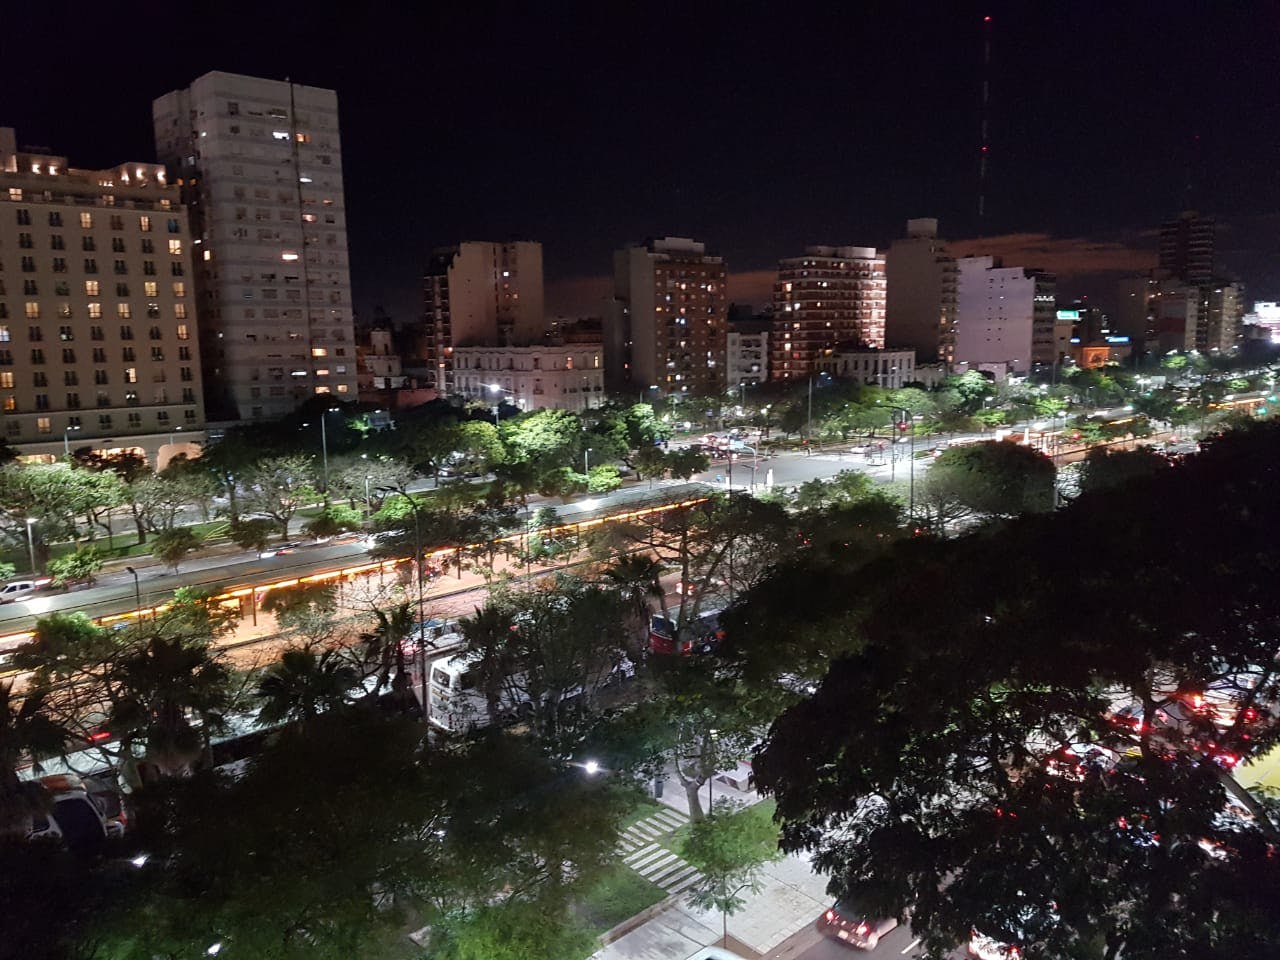 Argentinian dinner with amazing views of 9 de Julio Avenue